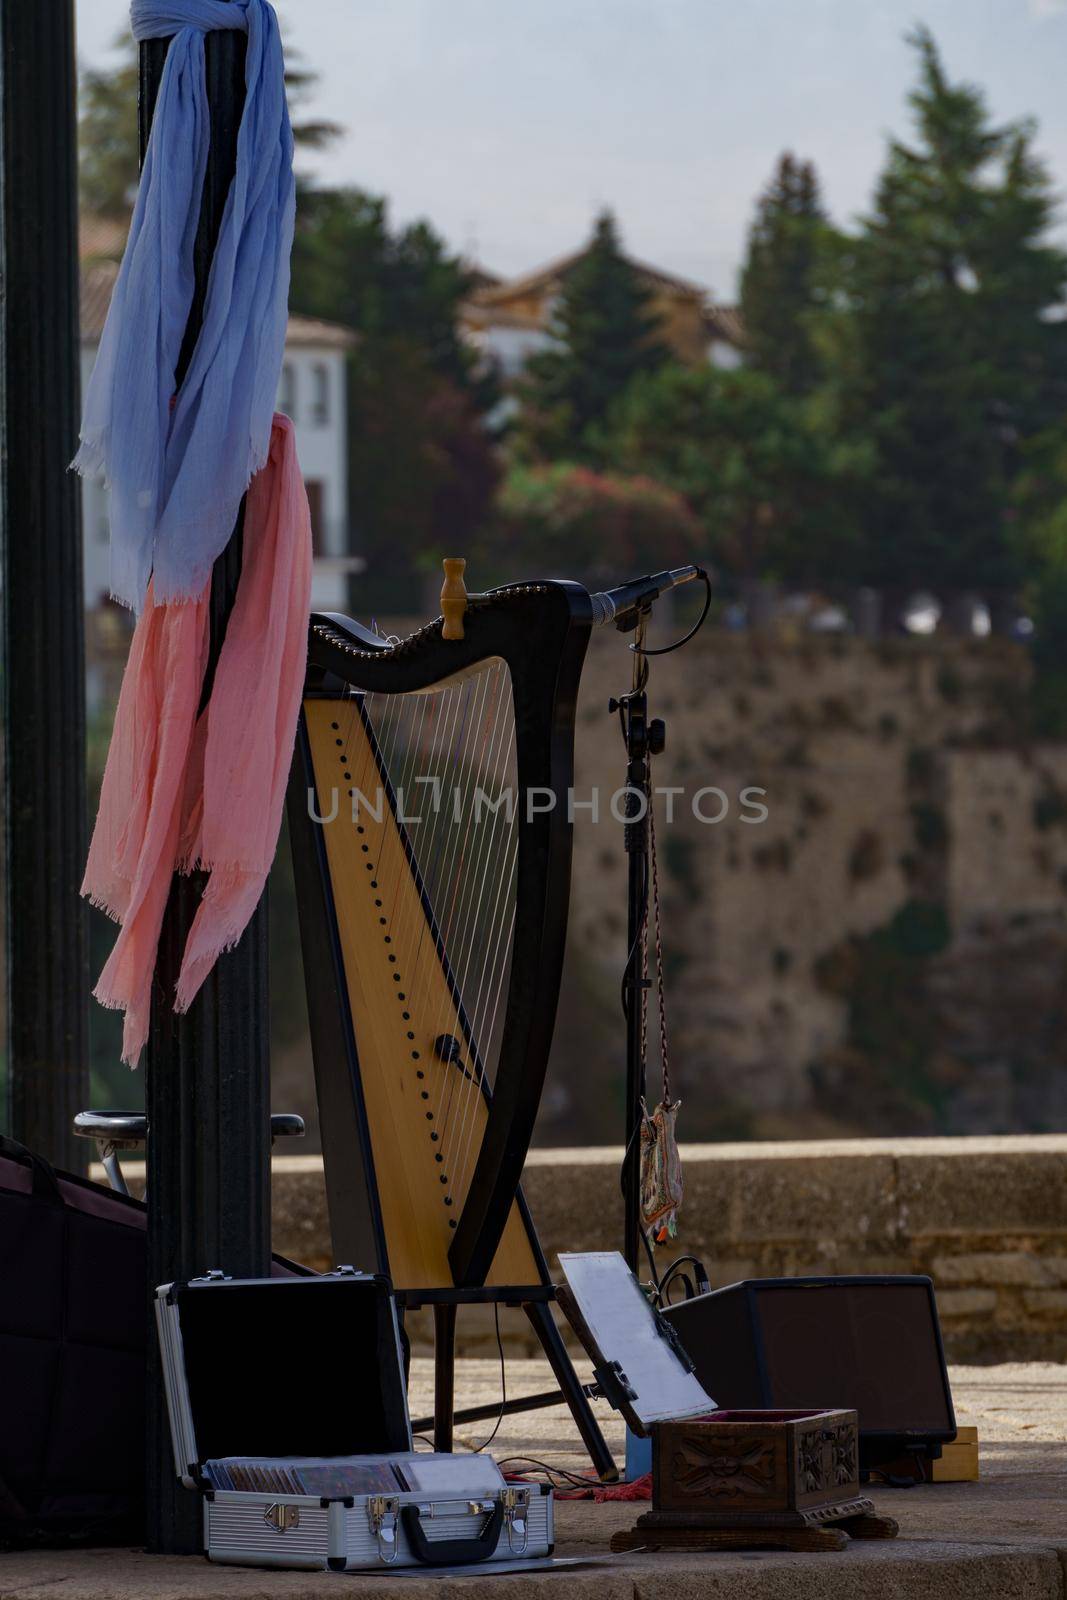 street musician's harp with colored handkerchiefs trees out of focus in the background